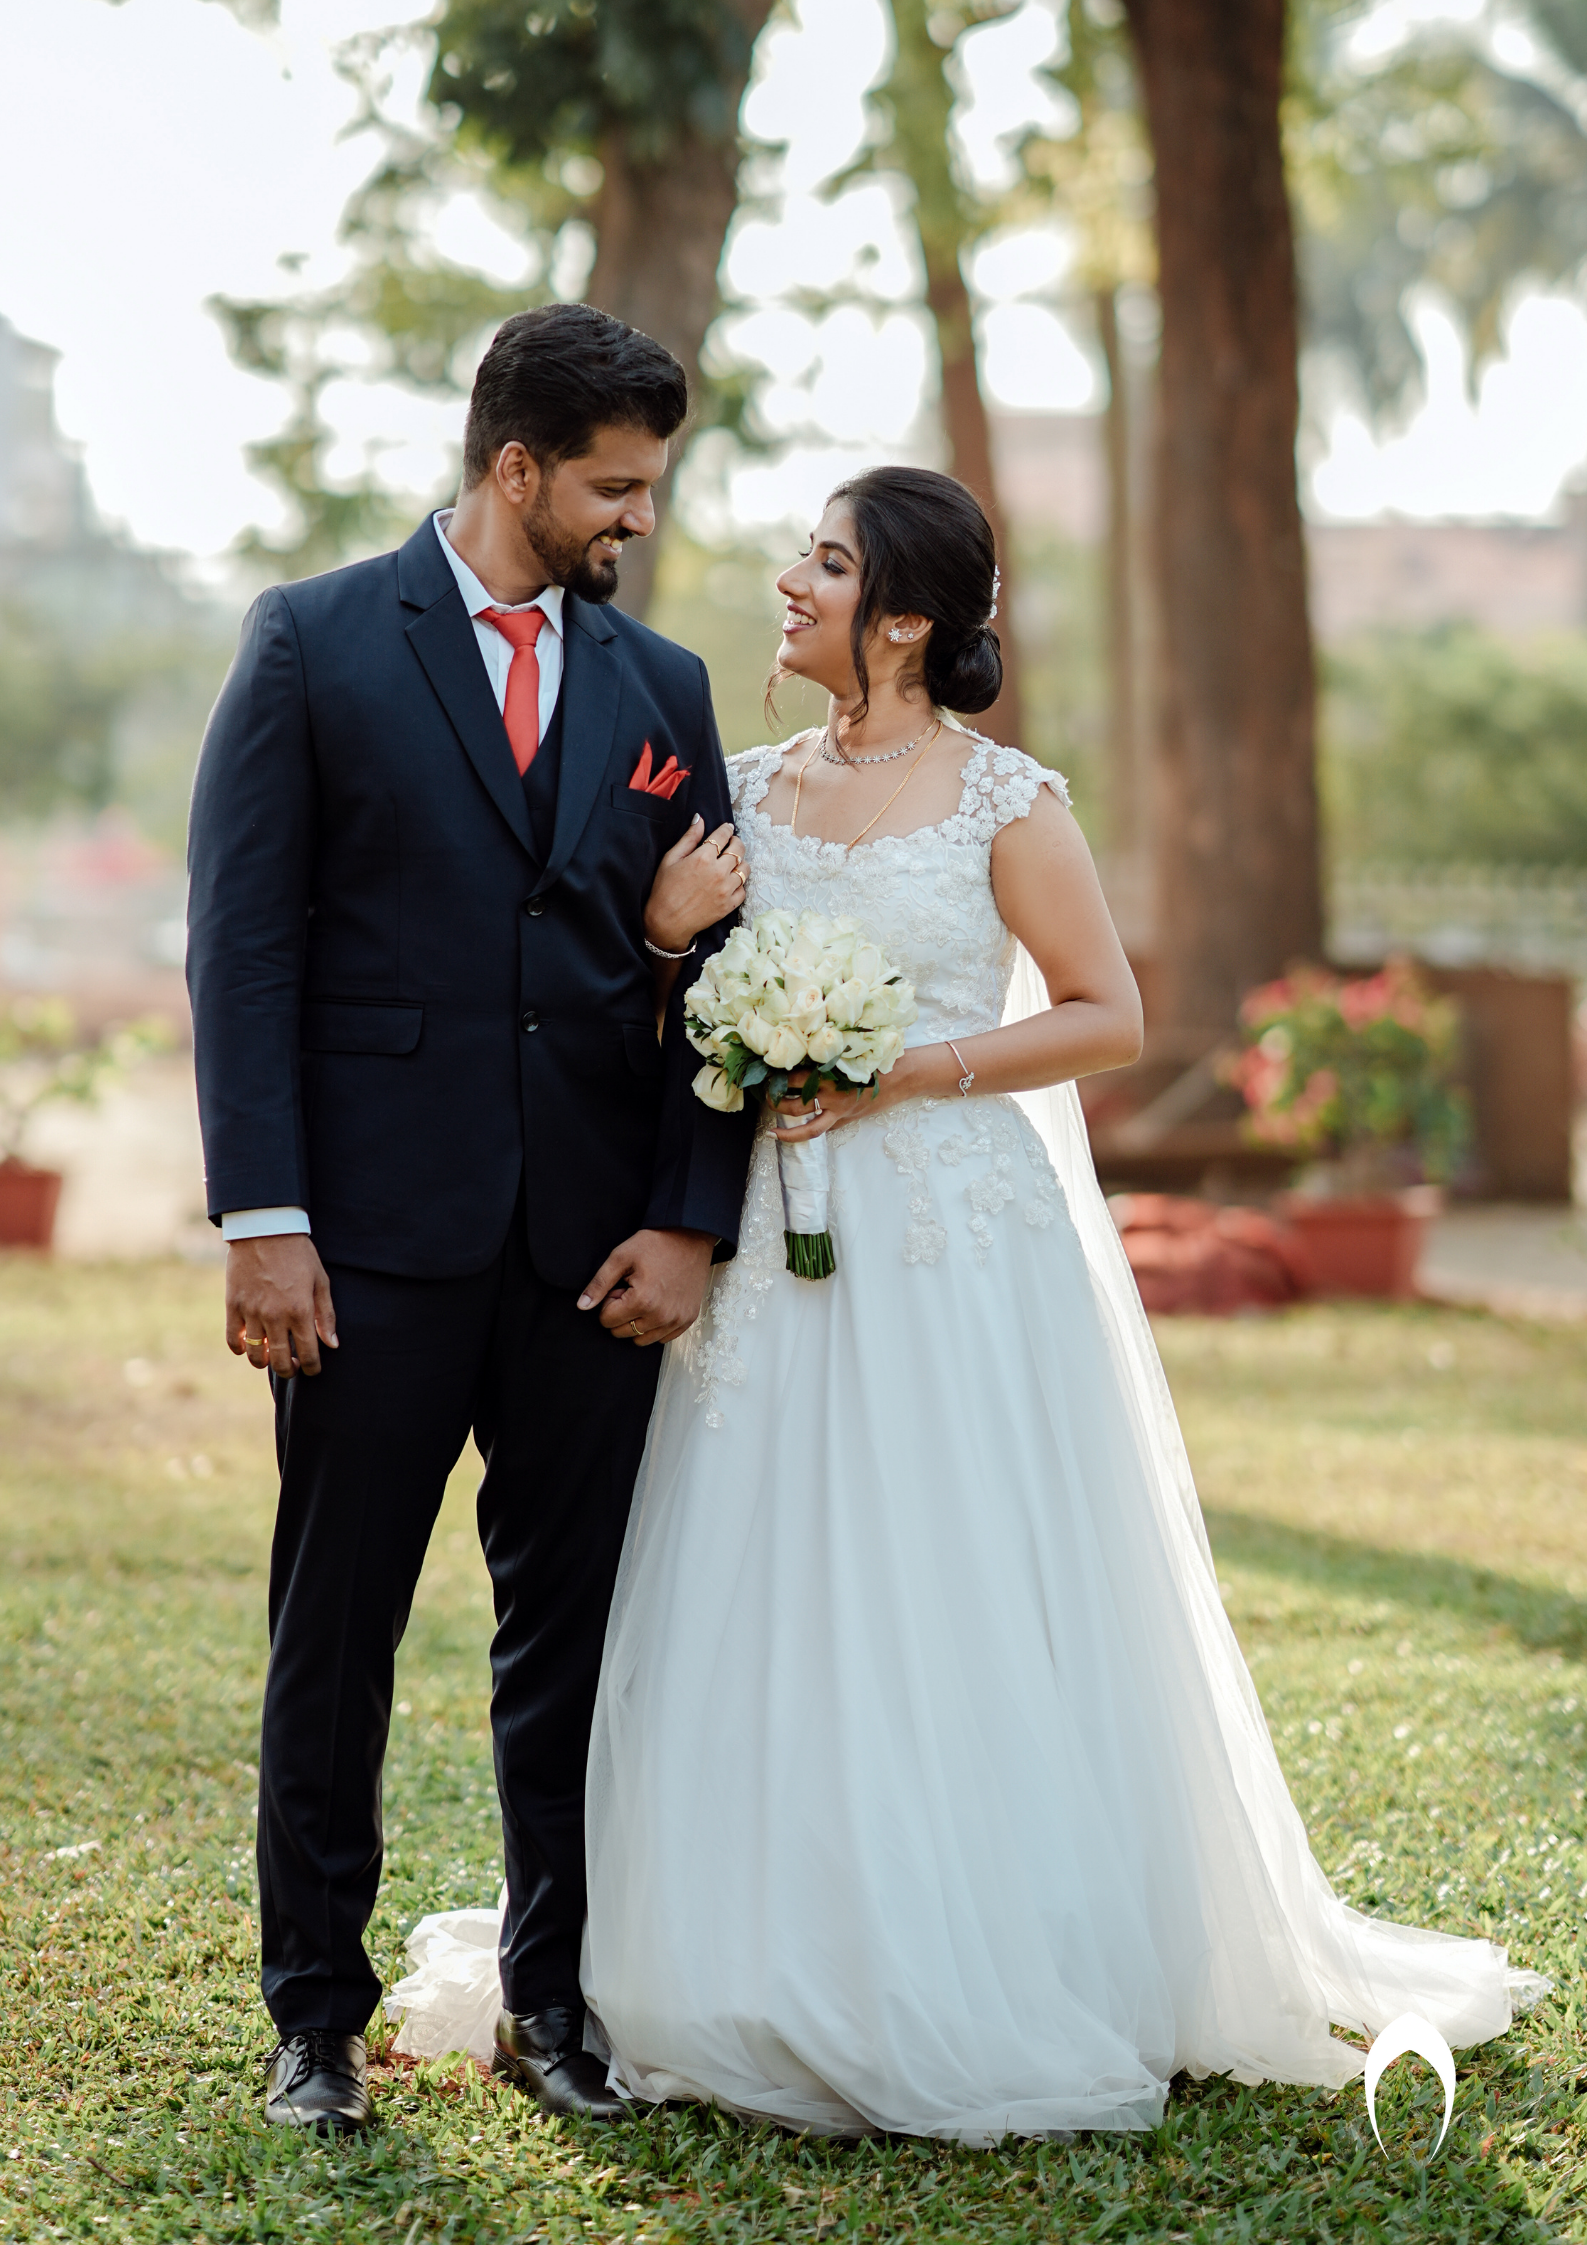 Christian Bridal Dresses | Christian Bridal Dresses In Chennai | Christian  Marriage Dresses